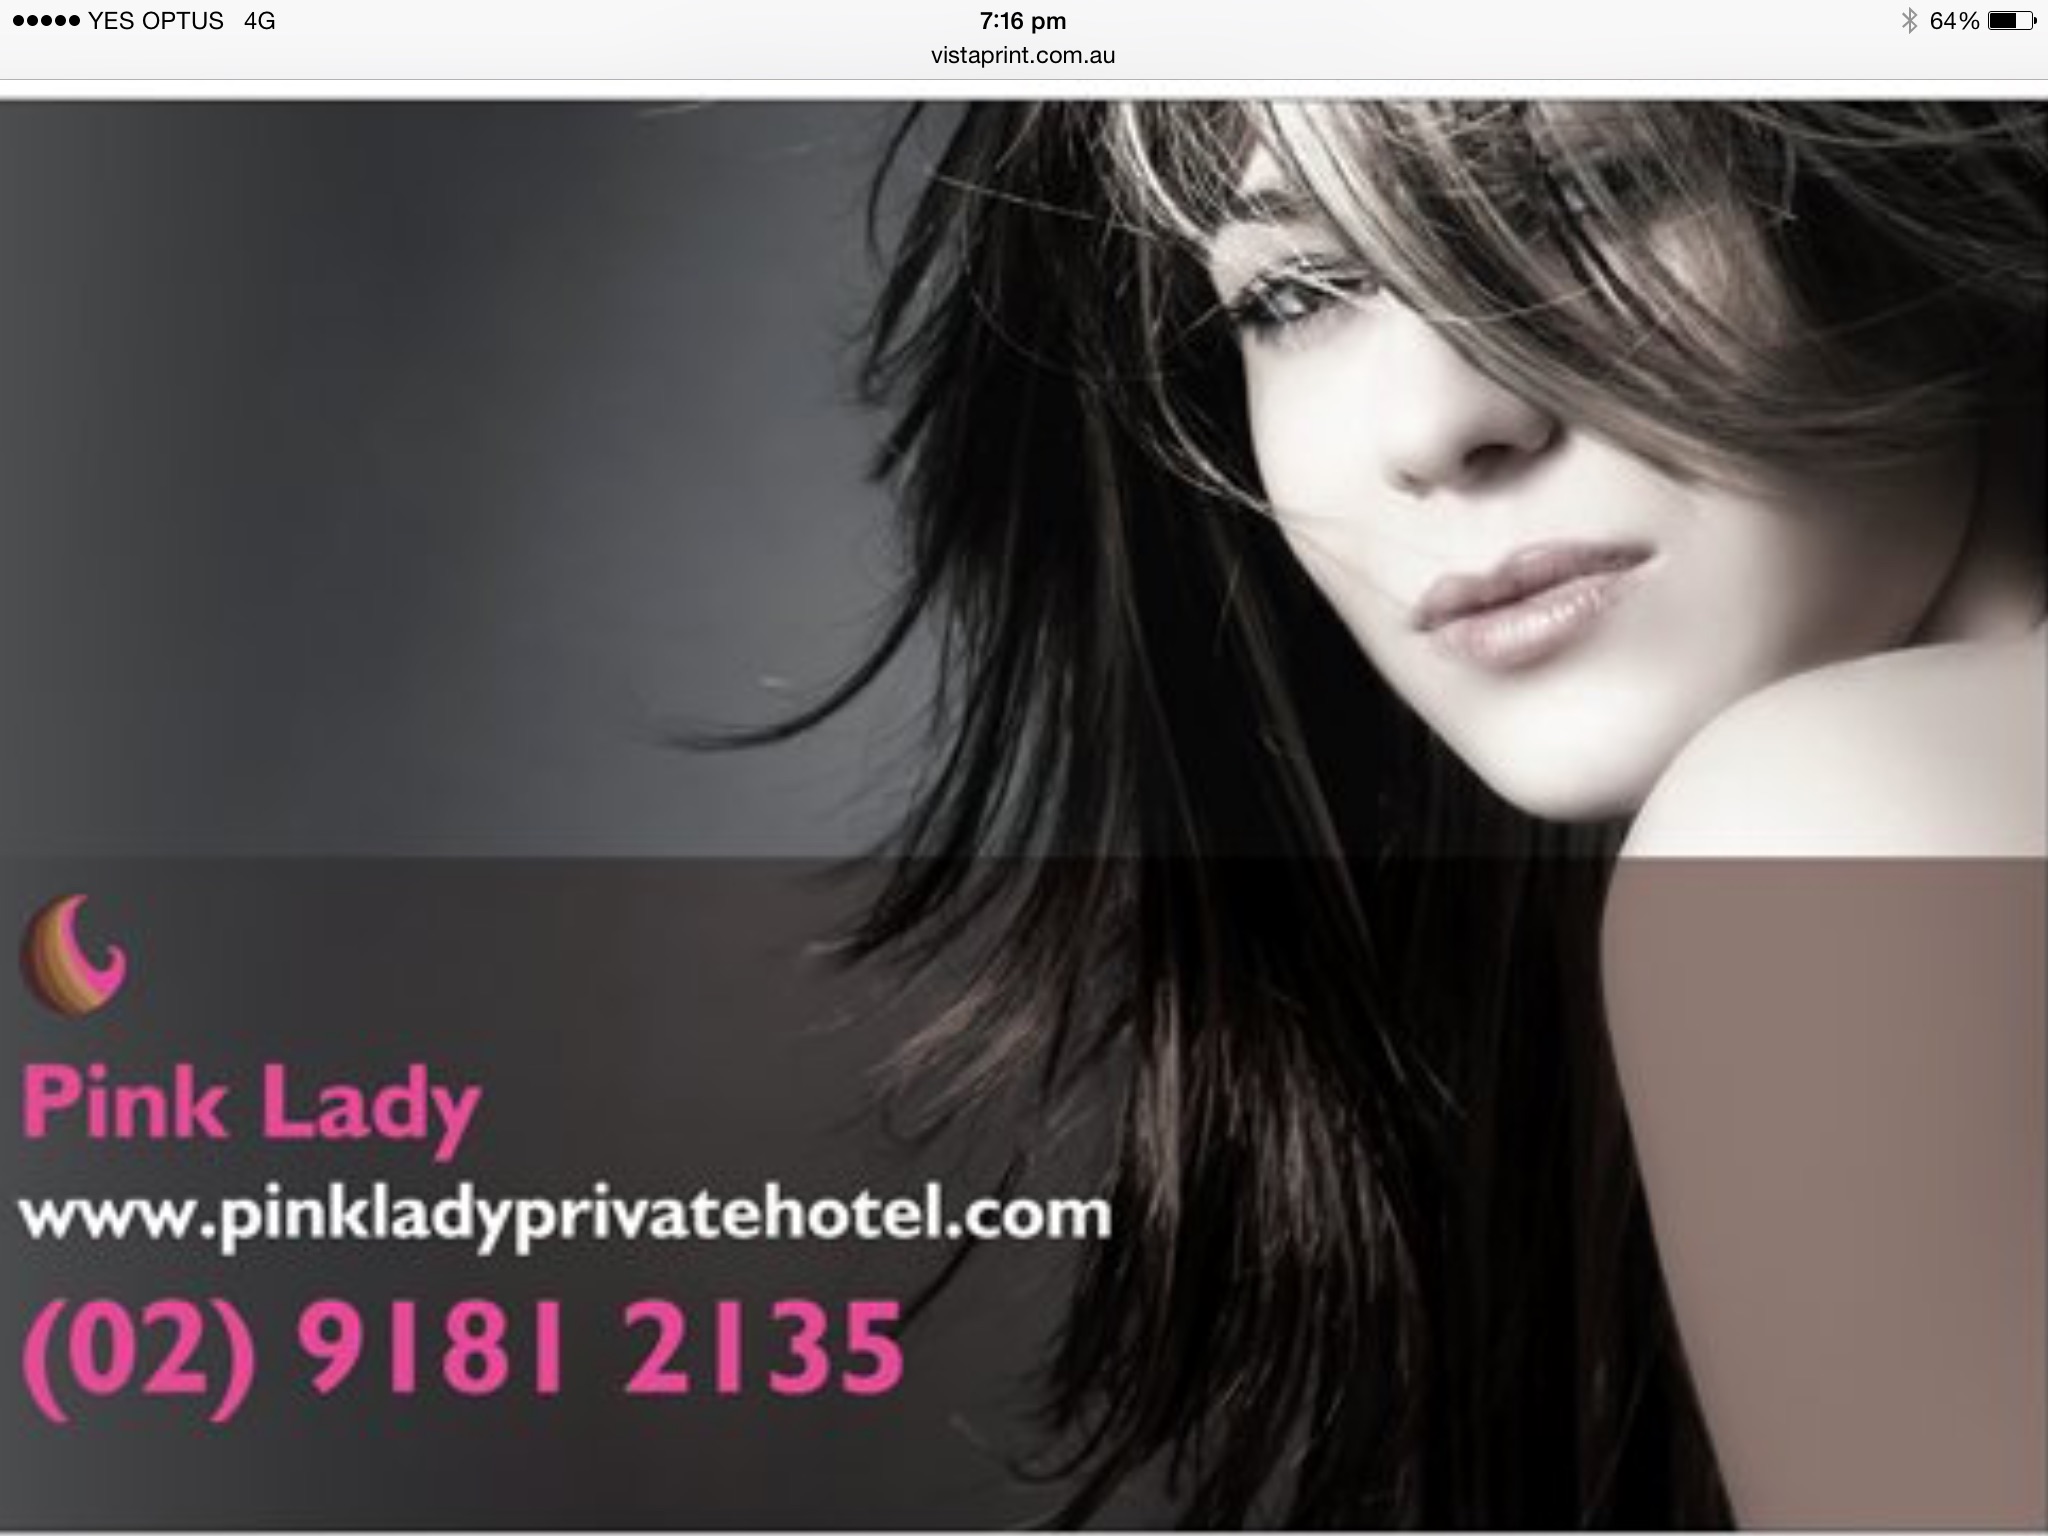 Pink Lady Private Hotel - Dalby Accommodation